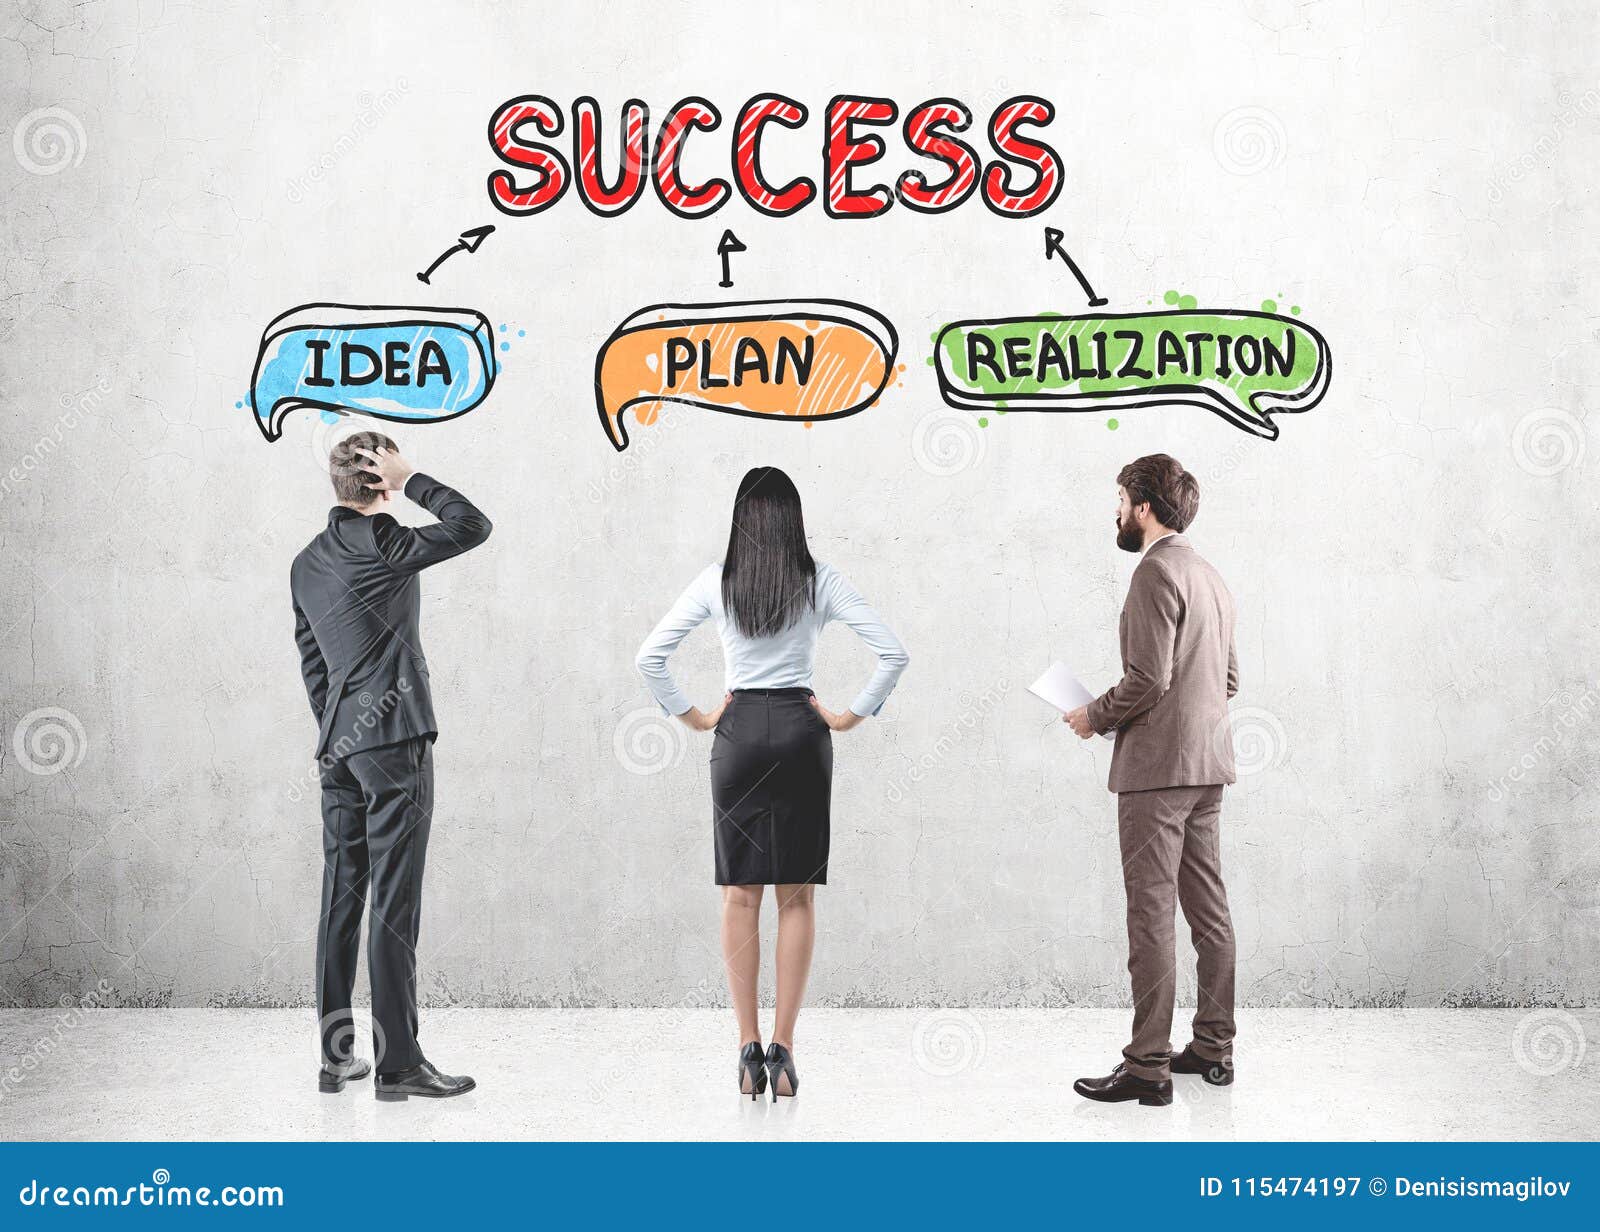 Team Looking for Success in Business and Life Stock Image - Image ...